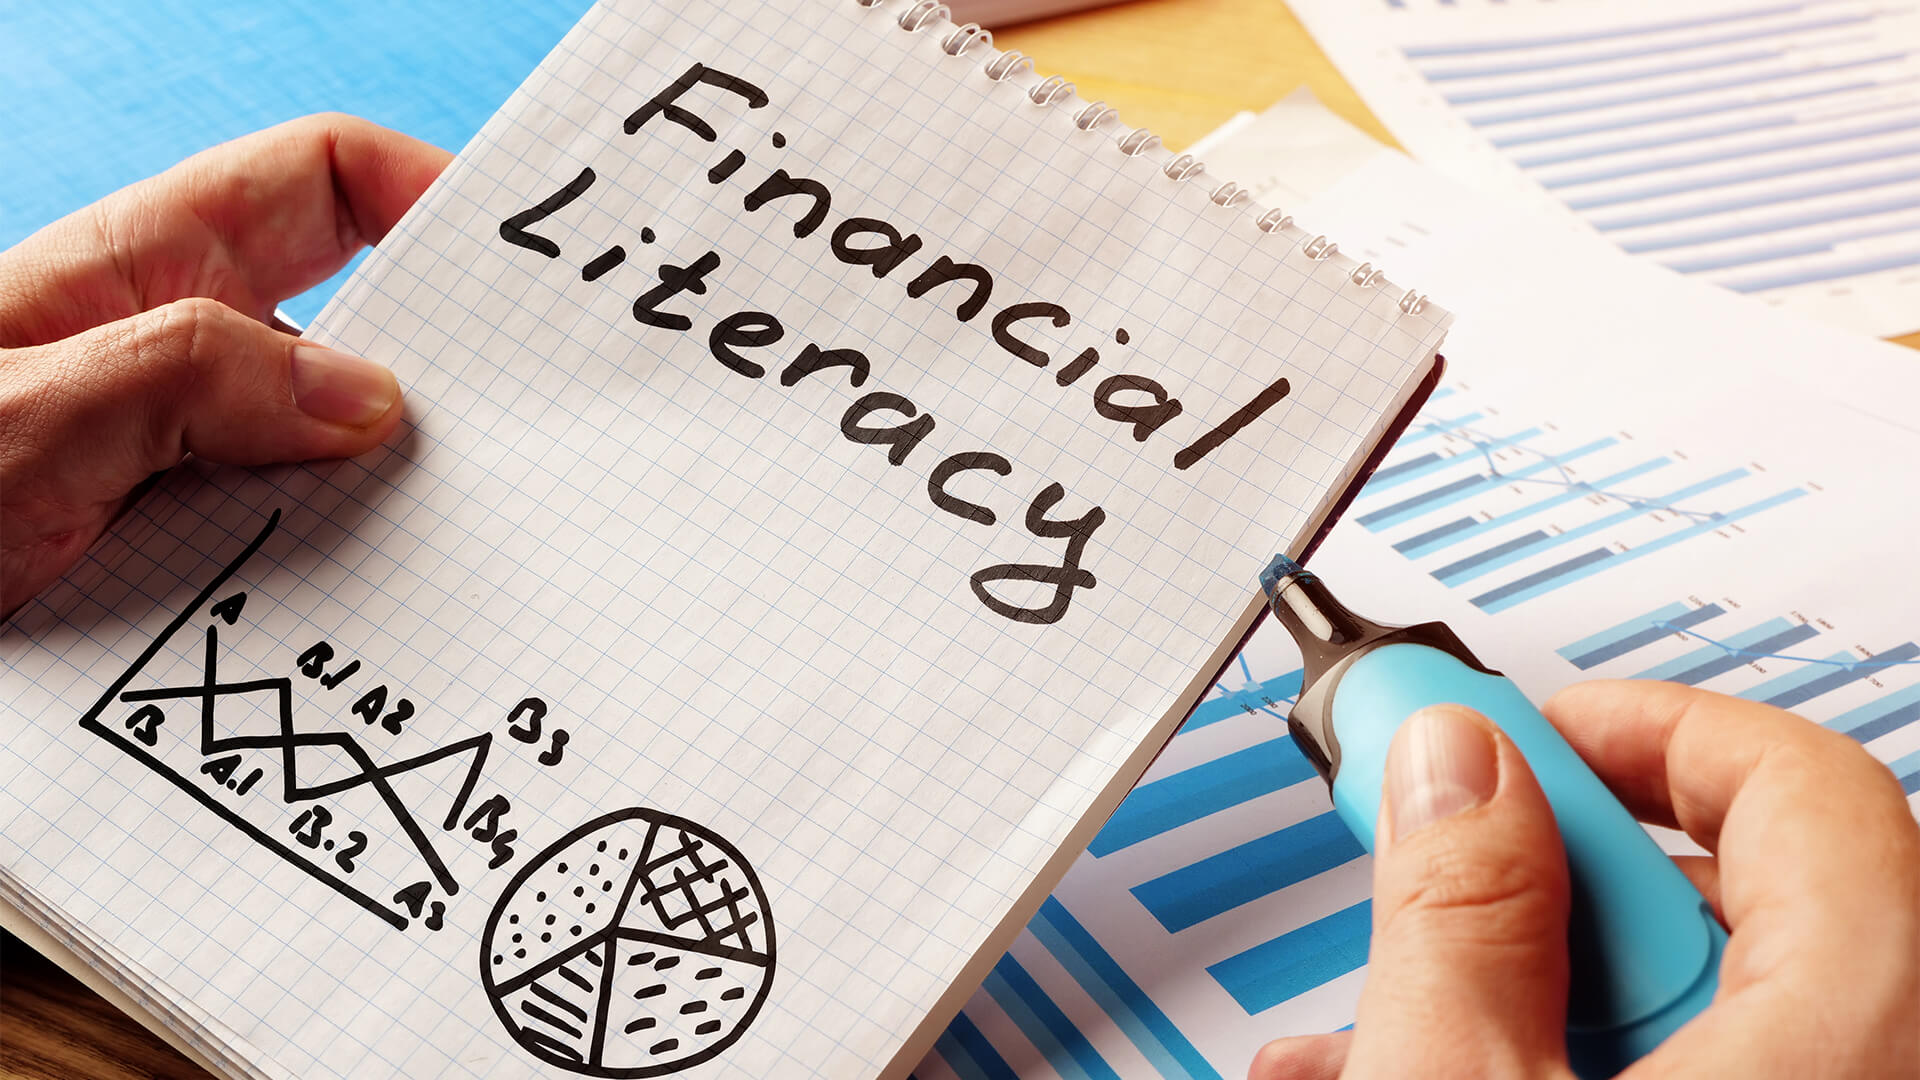 “Start young, build a financially sound future with financial literacy.”